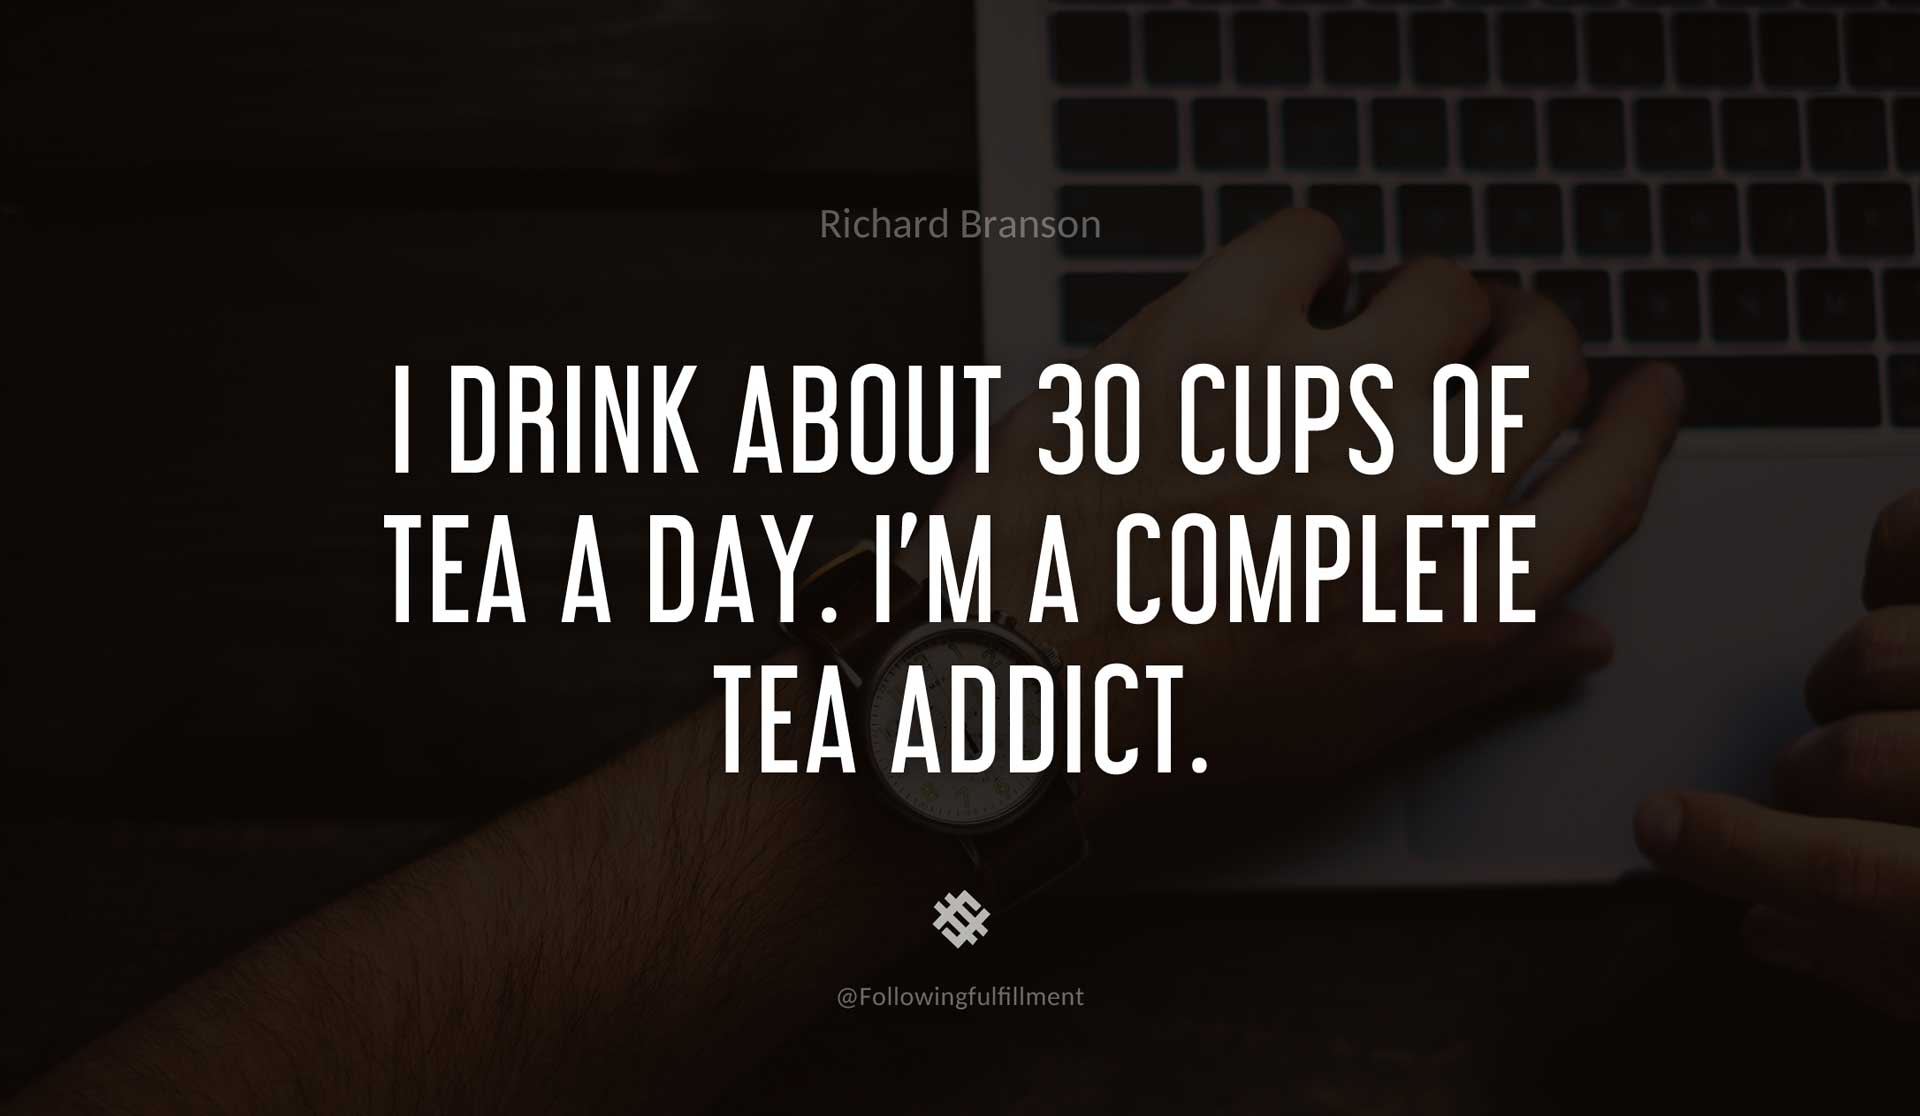 I-drink-about-30-cups-of-tea-a-day.-I'm-a-complete-tea-addict.-RICHARD-BRANSON-Quote.jpg